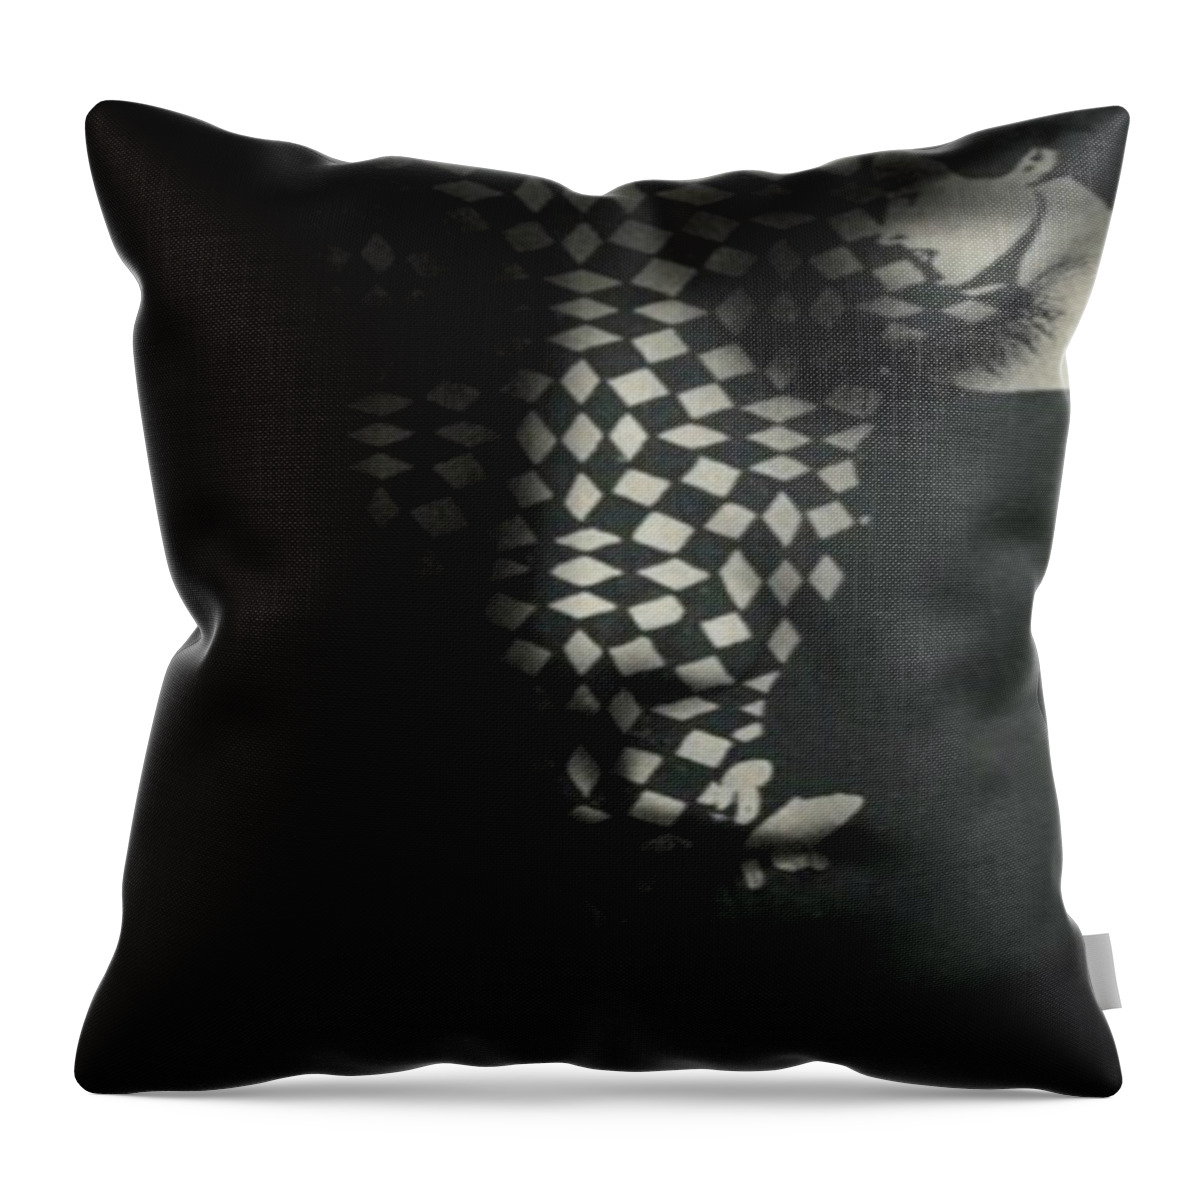 Woman Throw Pillow featuring the digital art I Can't Stop Loving You . by Paul Lovering